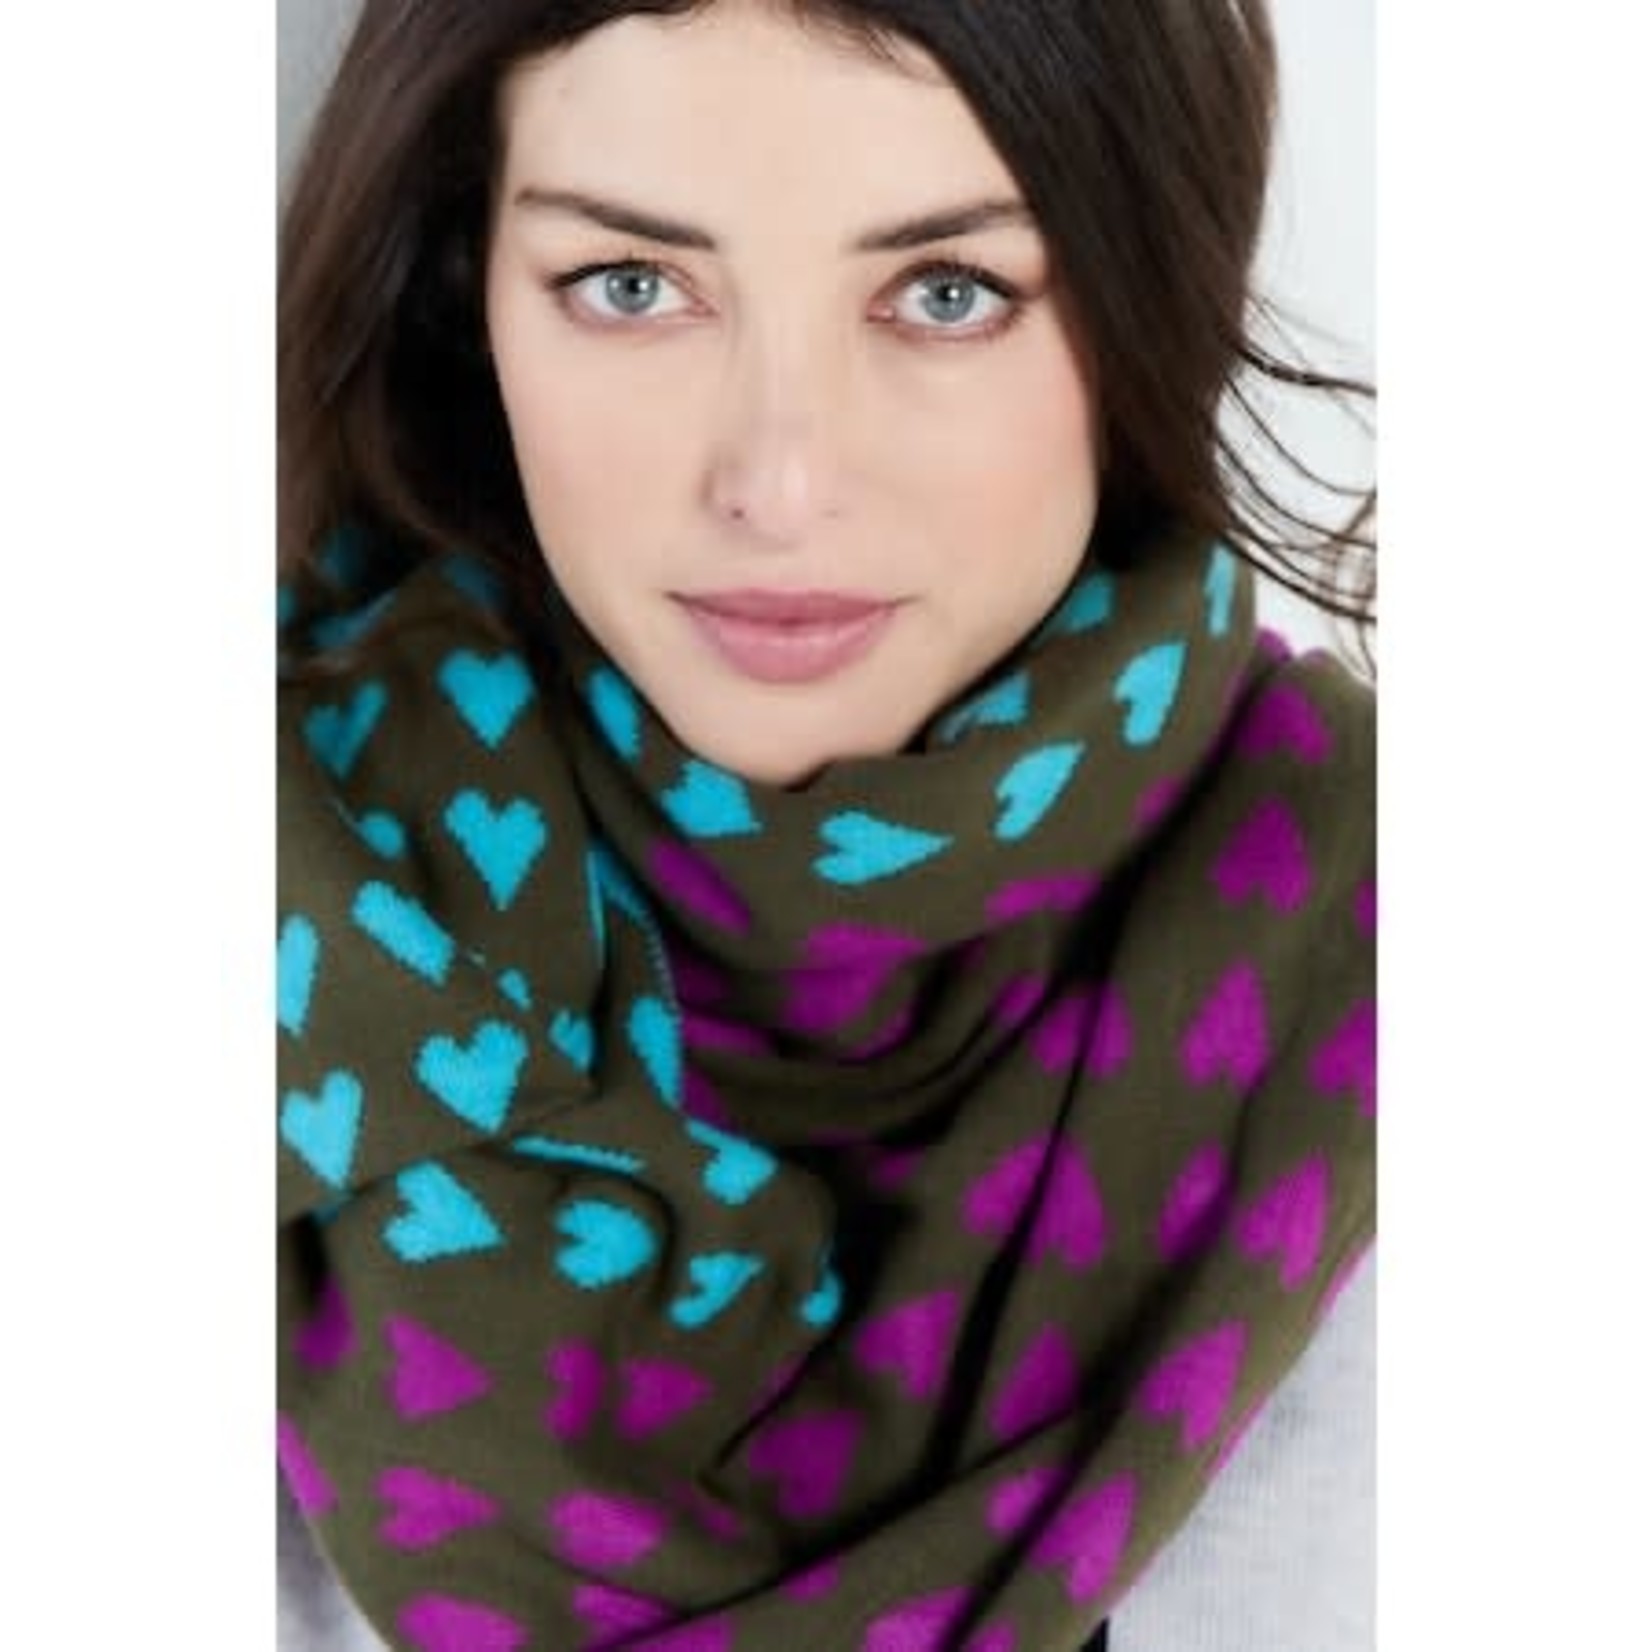 Lisa Todd Love Lines Scarf